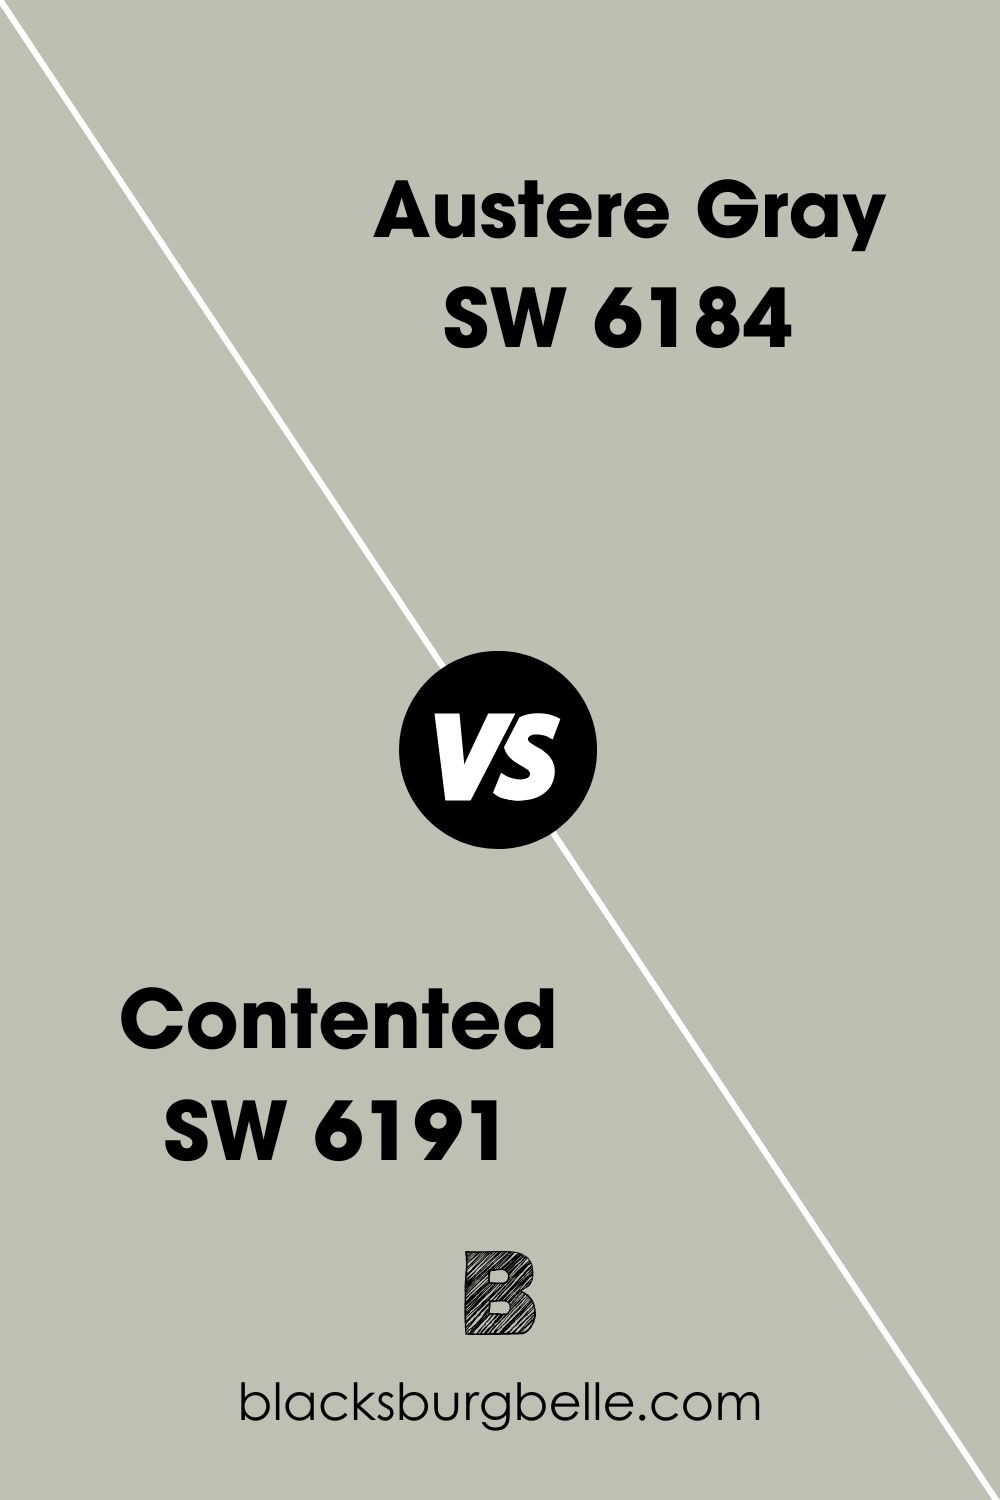 Contented SW 6191